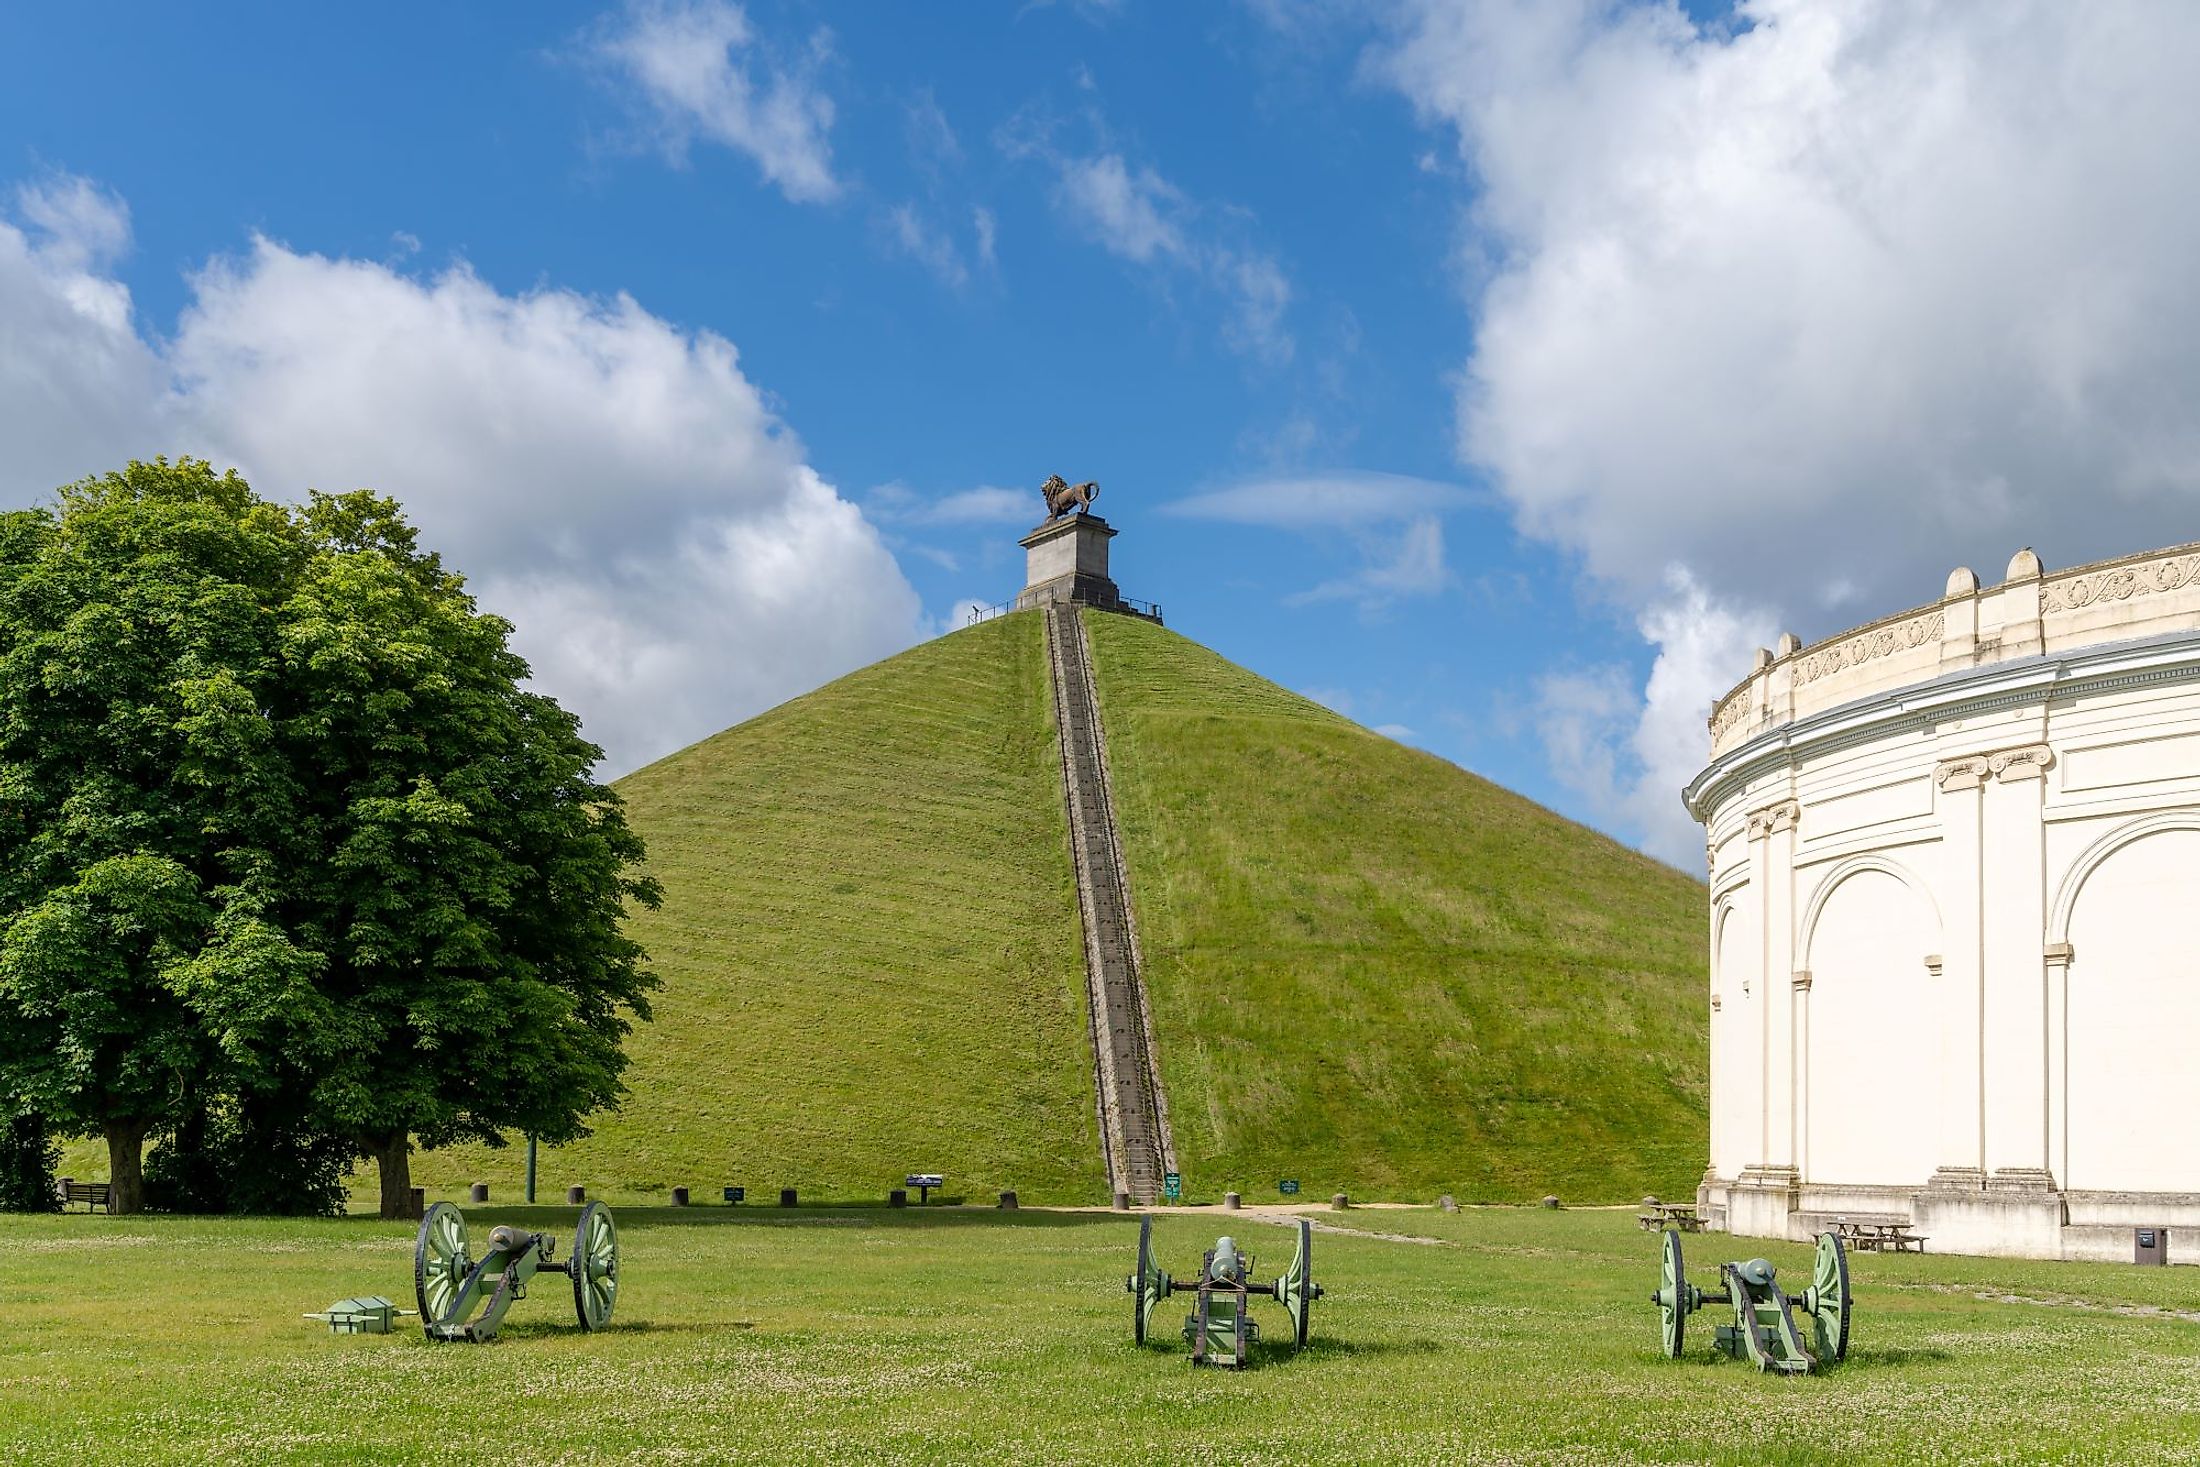 View of the Lion's Mound and cannons at the Waterloo Battlefield Memorial outside of Brussels, Belgium. Editorial credit: makasana photo / Shutterstock.com